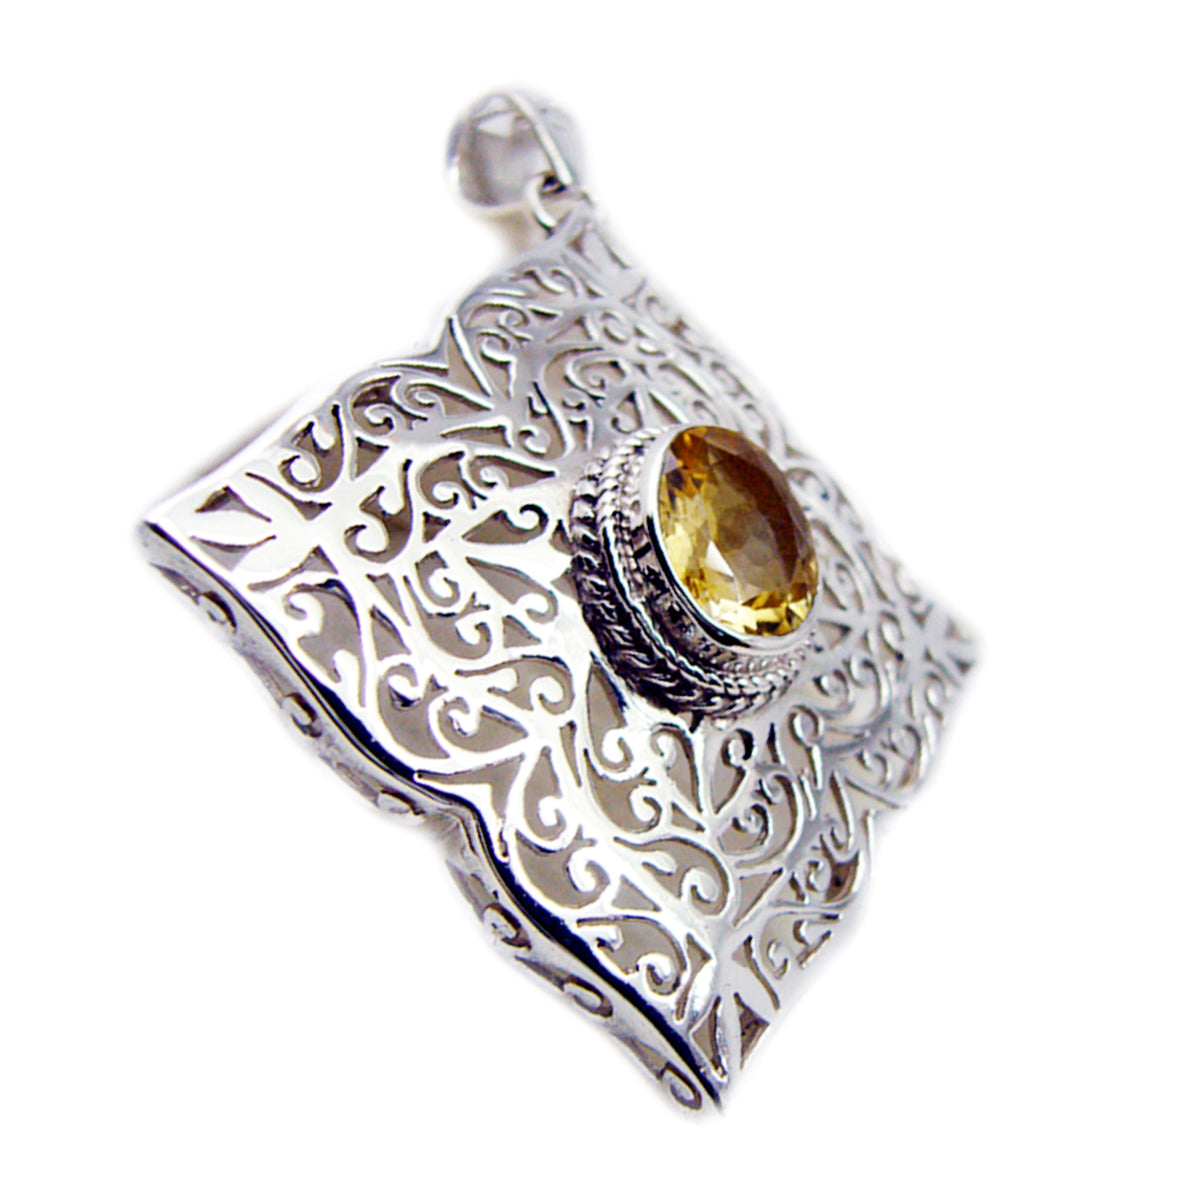 Riyo Engaging Gemstone Round Faceted Yellow Citrine 999 Sterling Silver Pendant Gift For Teachers Day